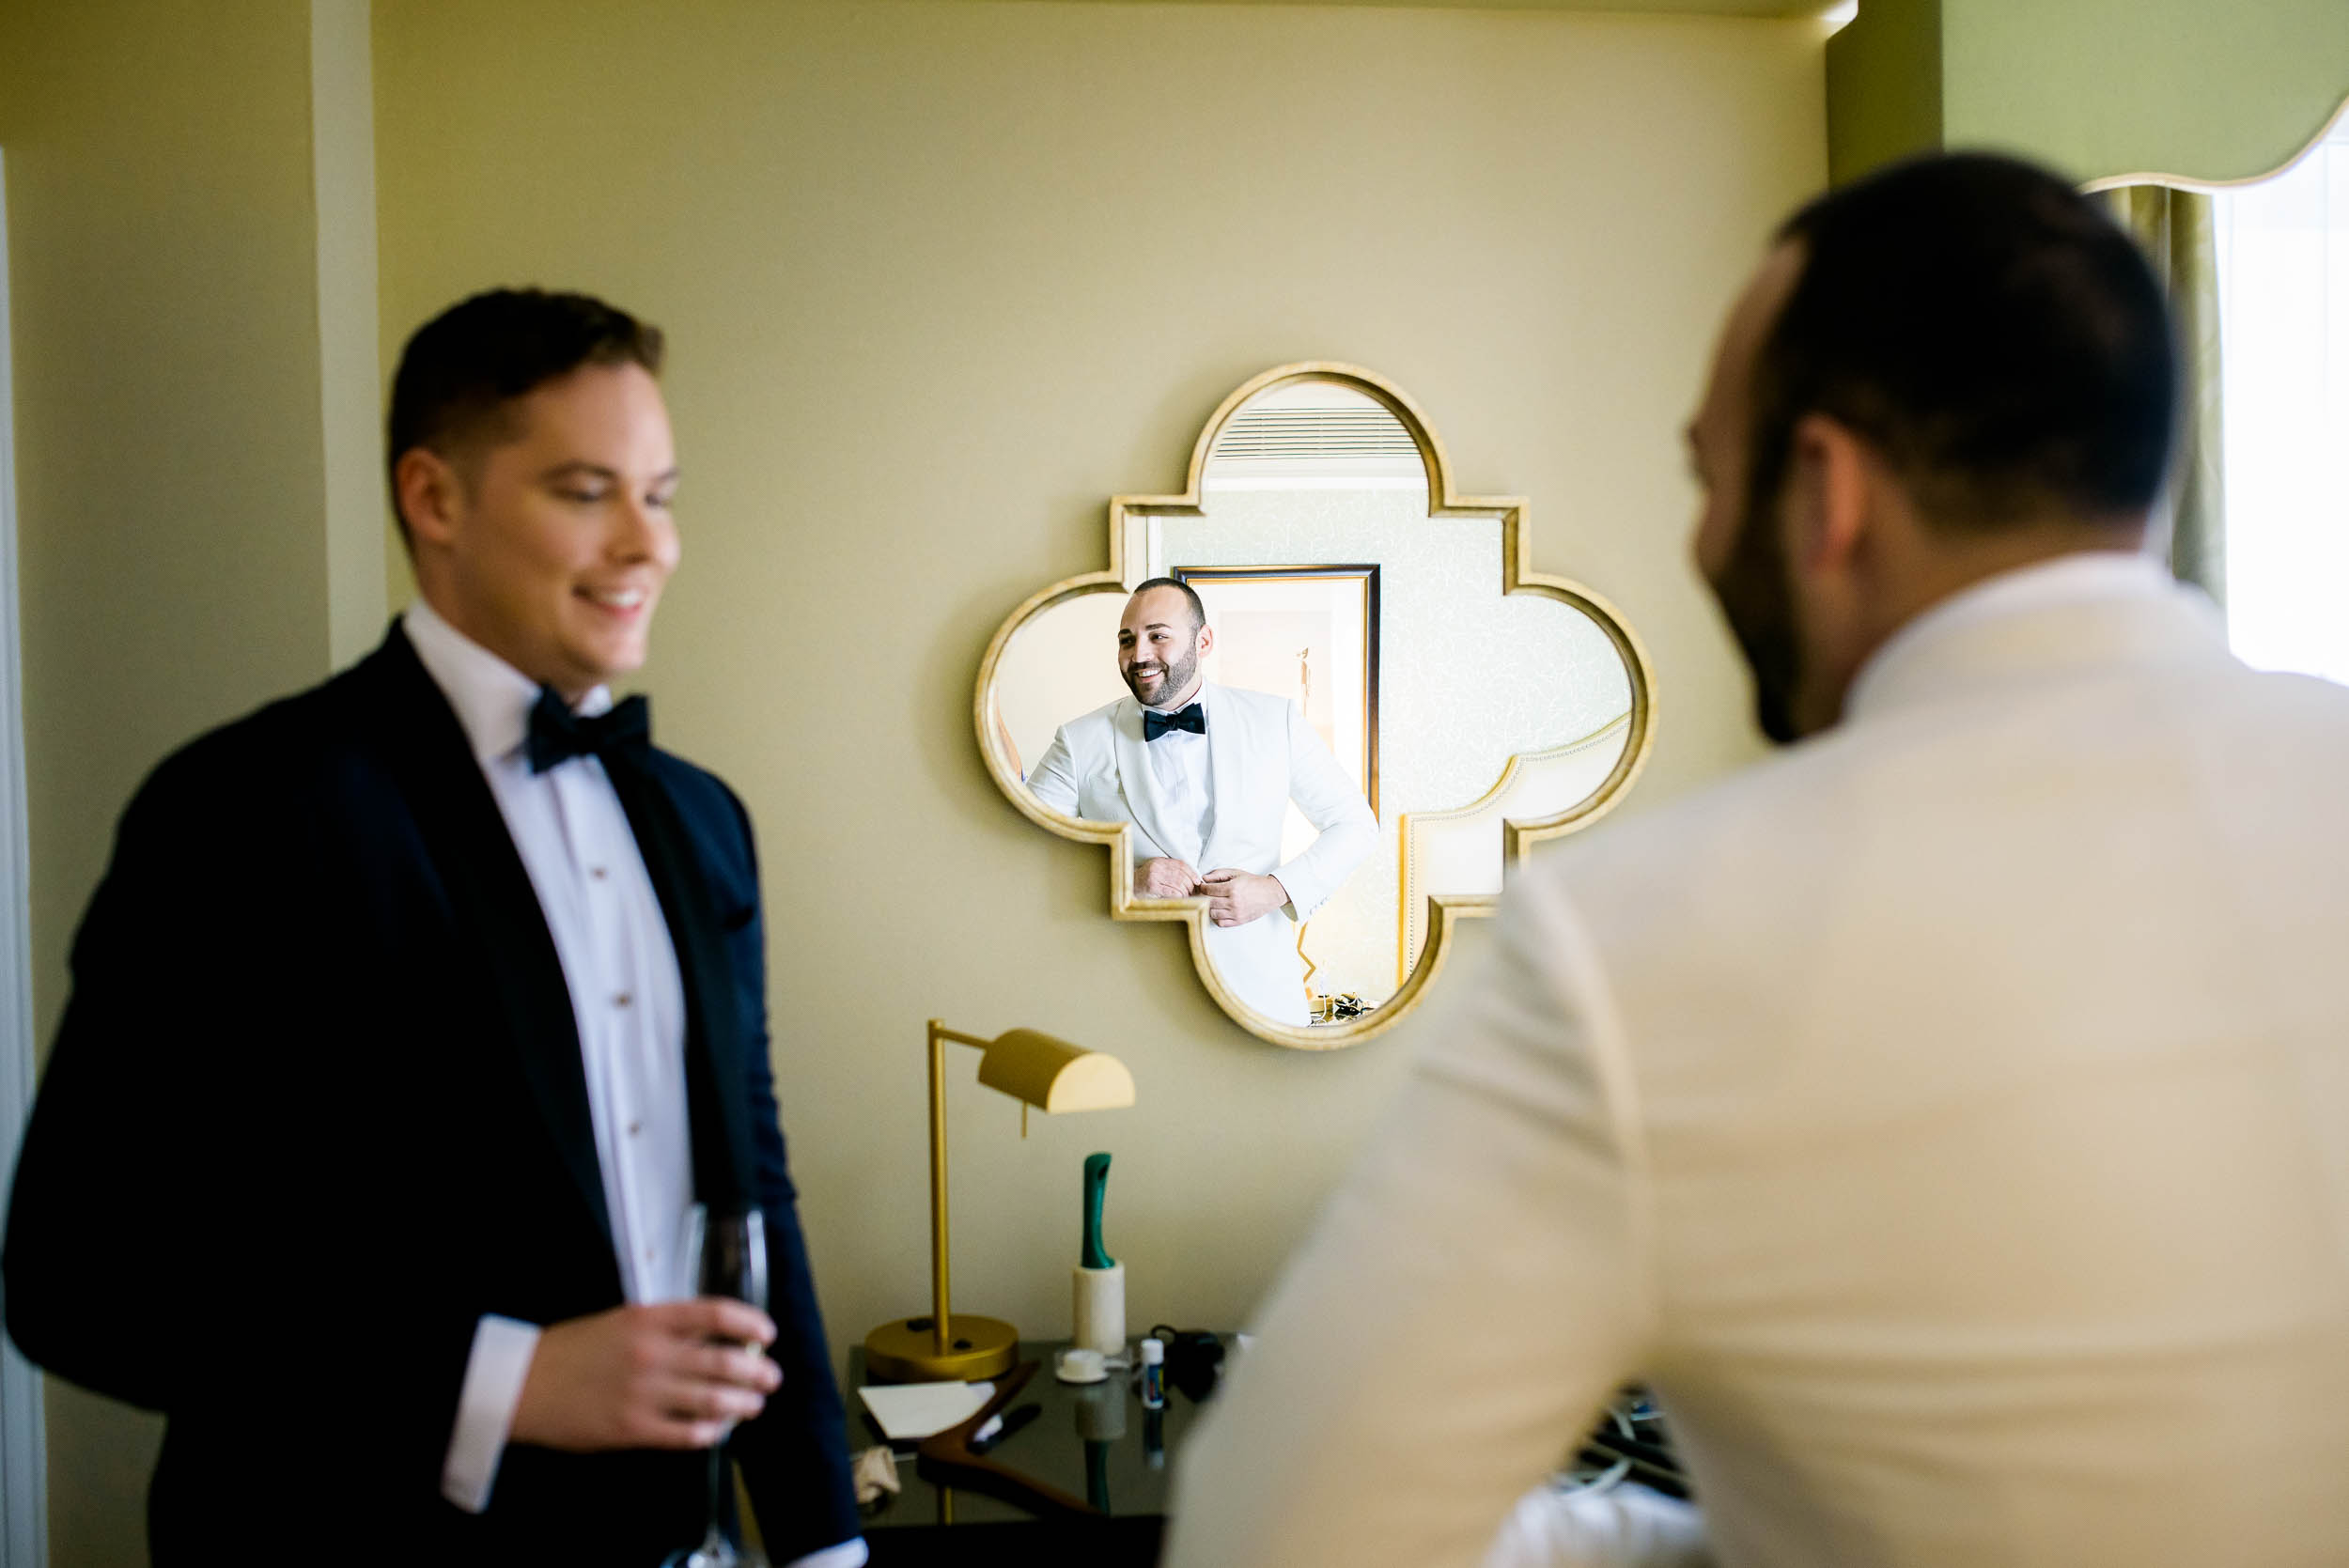 Grooms getting ready for luxurious fall wedding at the Chicago Symphony Center captured by J. Brown Photography. See more wedding ideas at jbrownphotography.com!